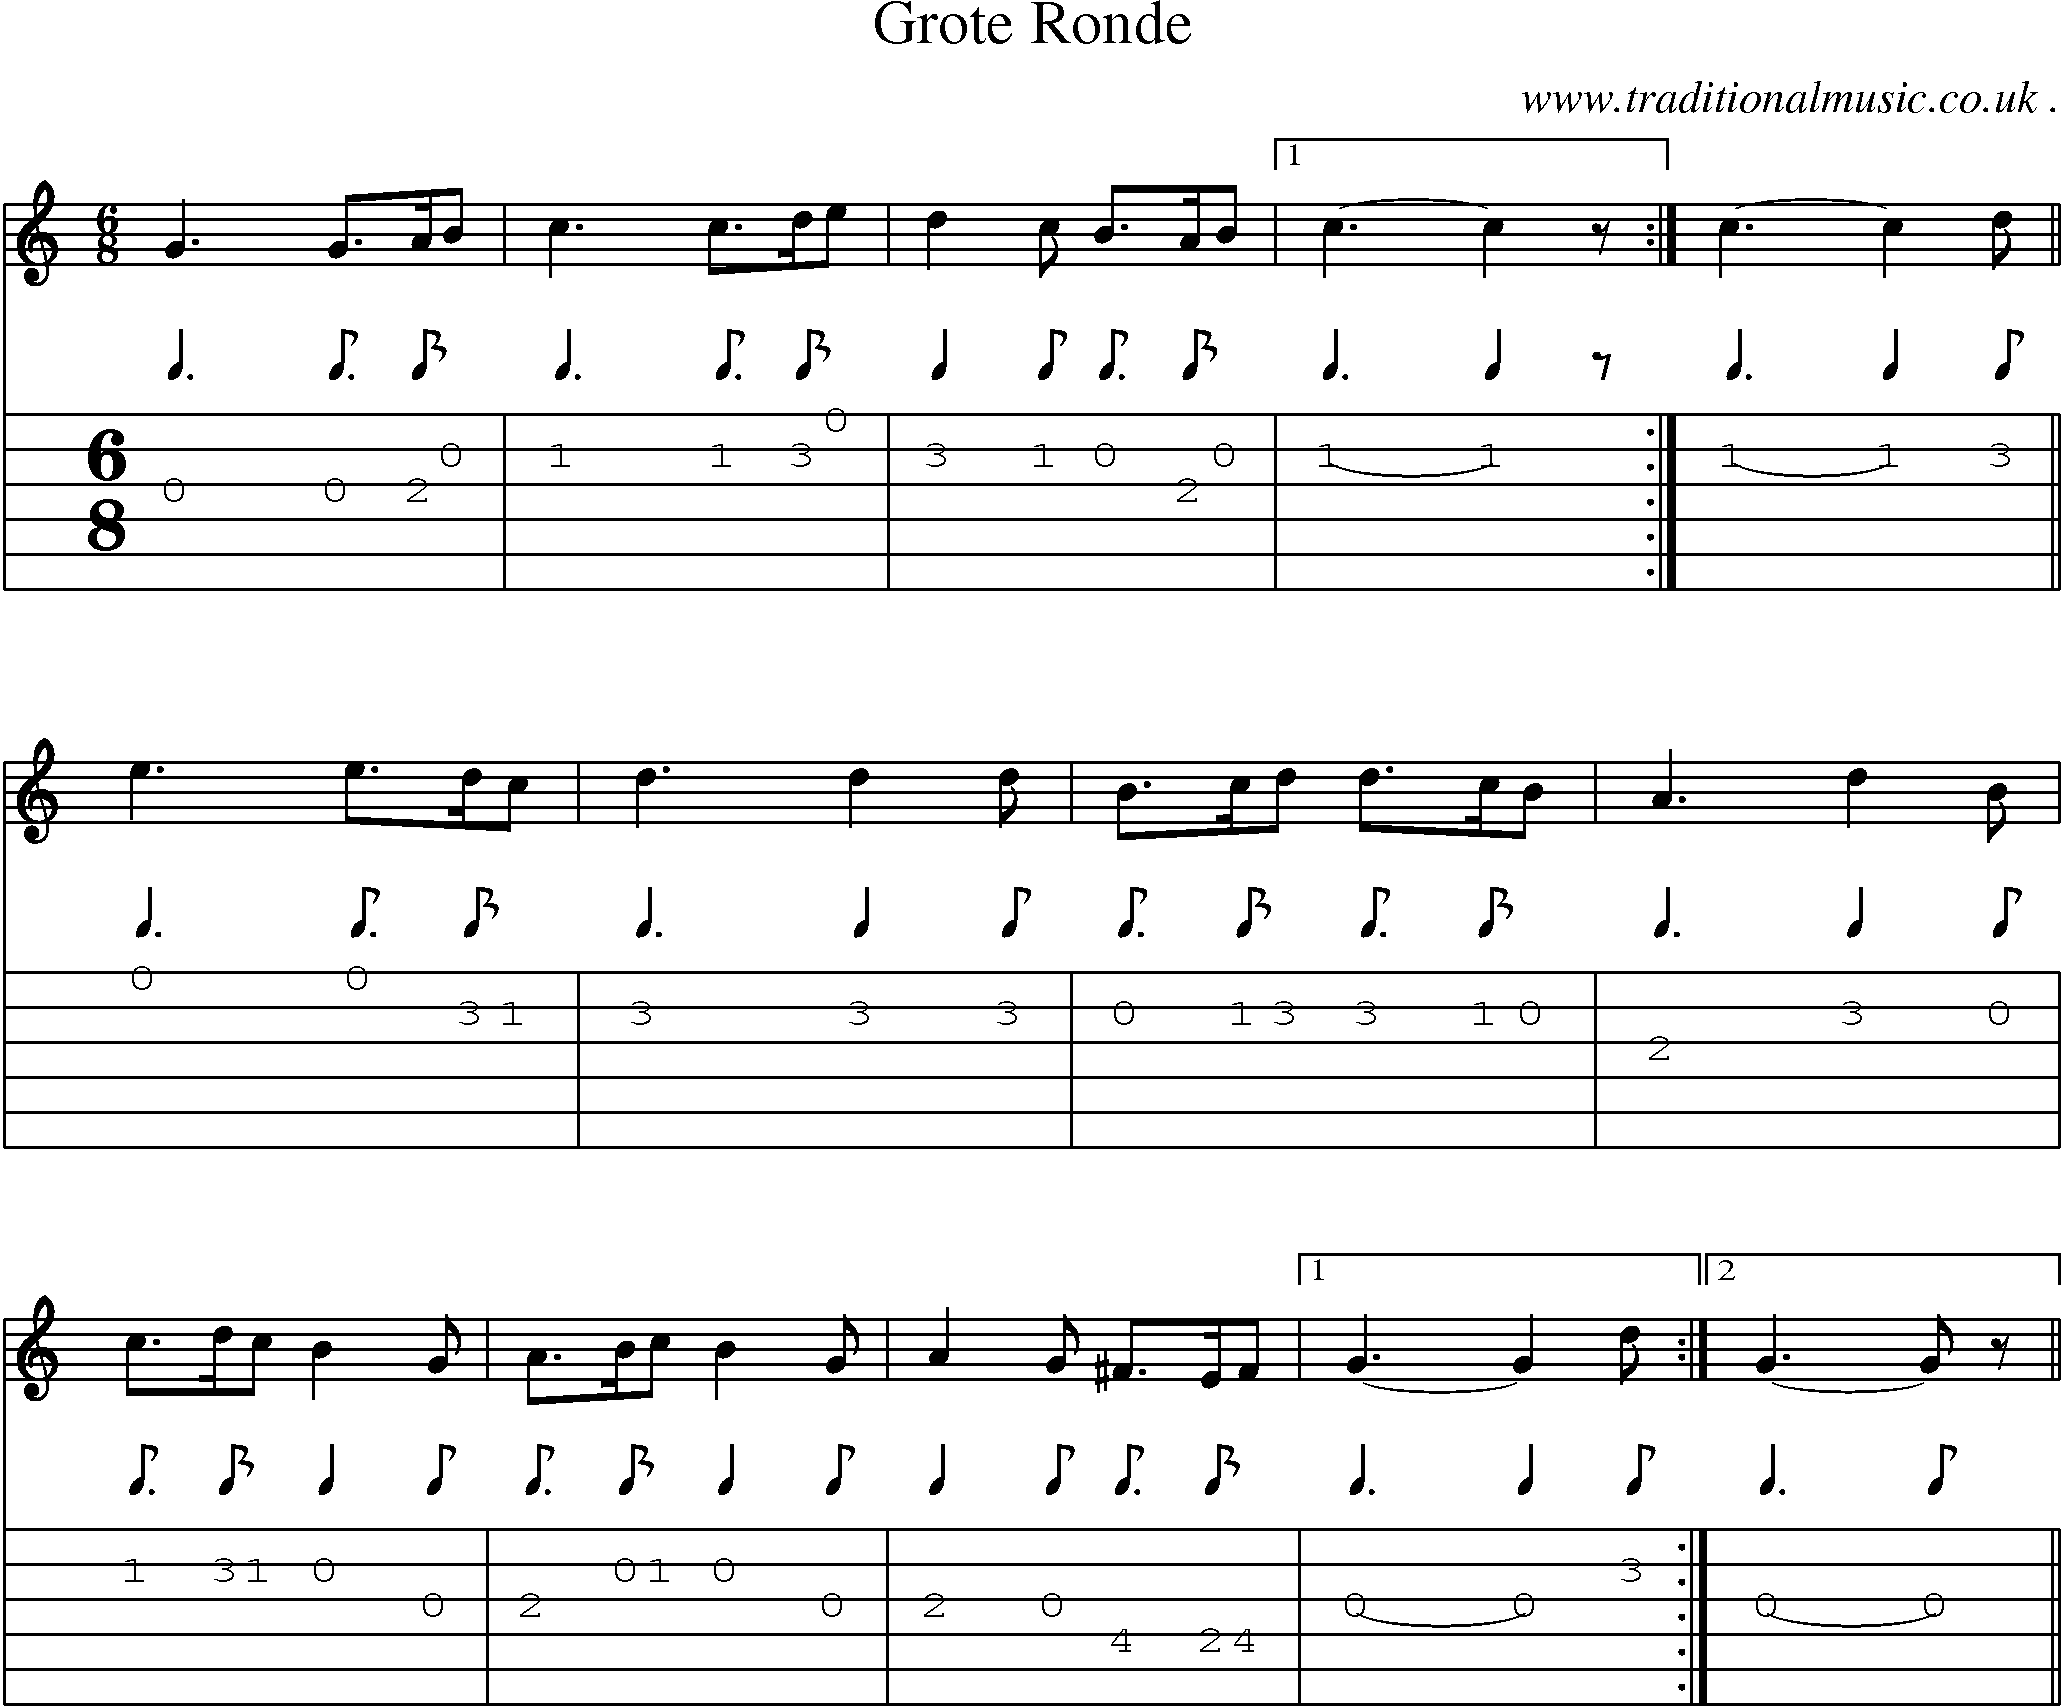 Sheet-Music and Guitar Tabs for Grote Ronde